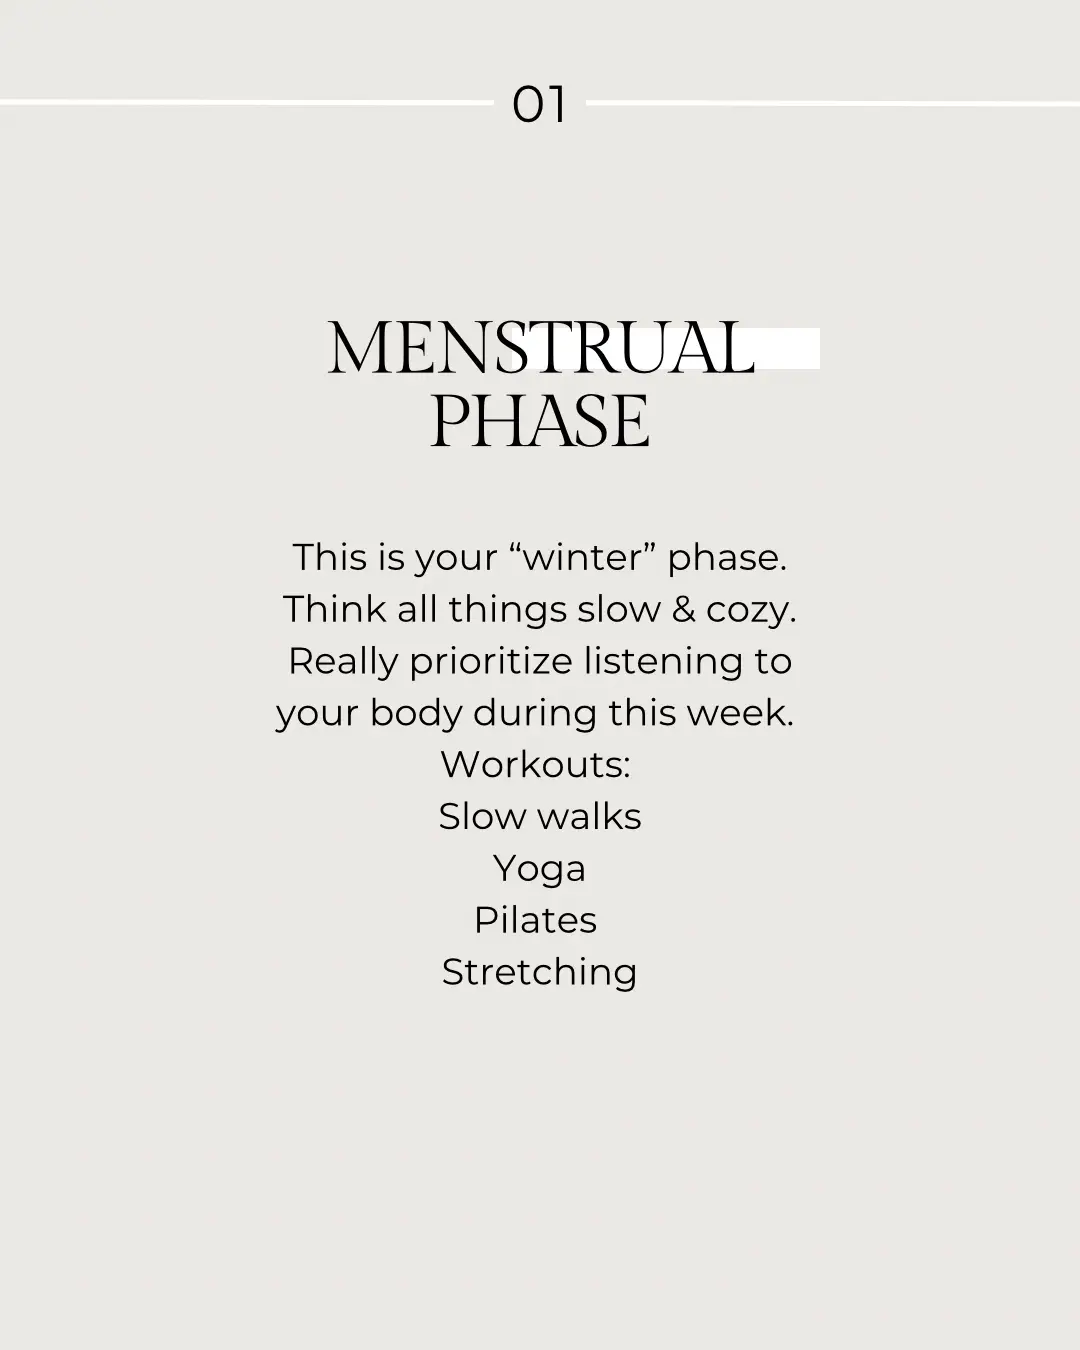 Cycle syncing is adjusting your routines around the phases of your  menstrual cycle. Simply follow this cheat sheet to start! 🗓️